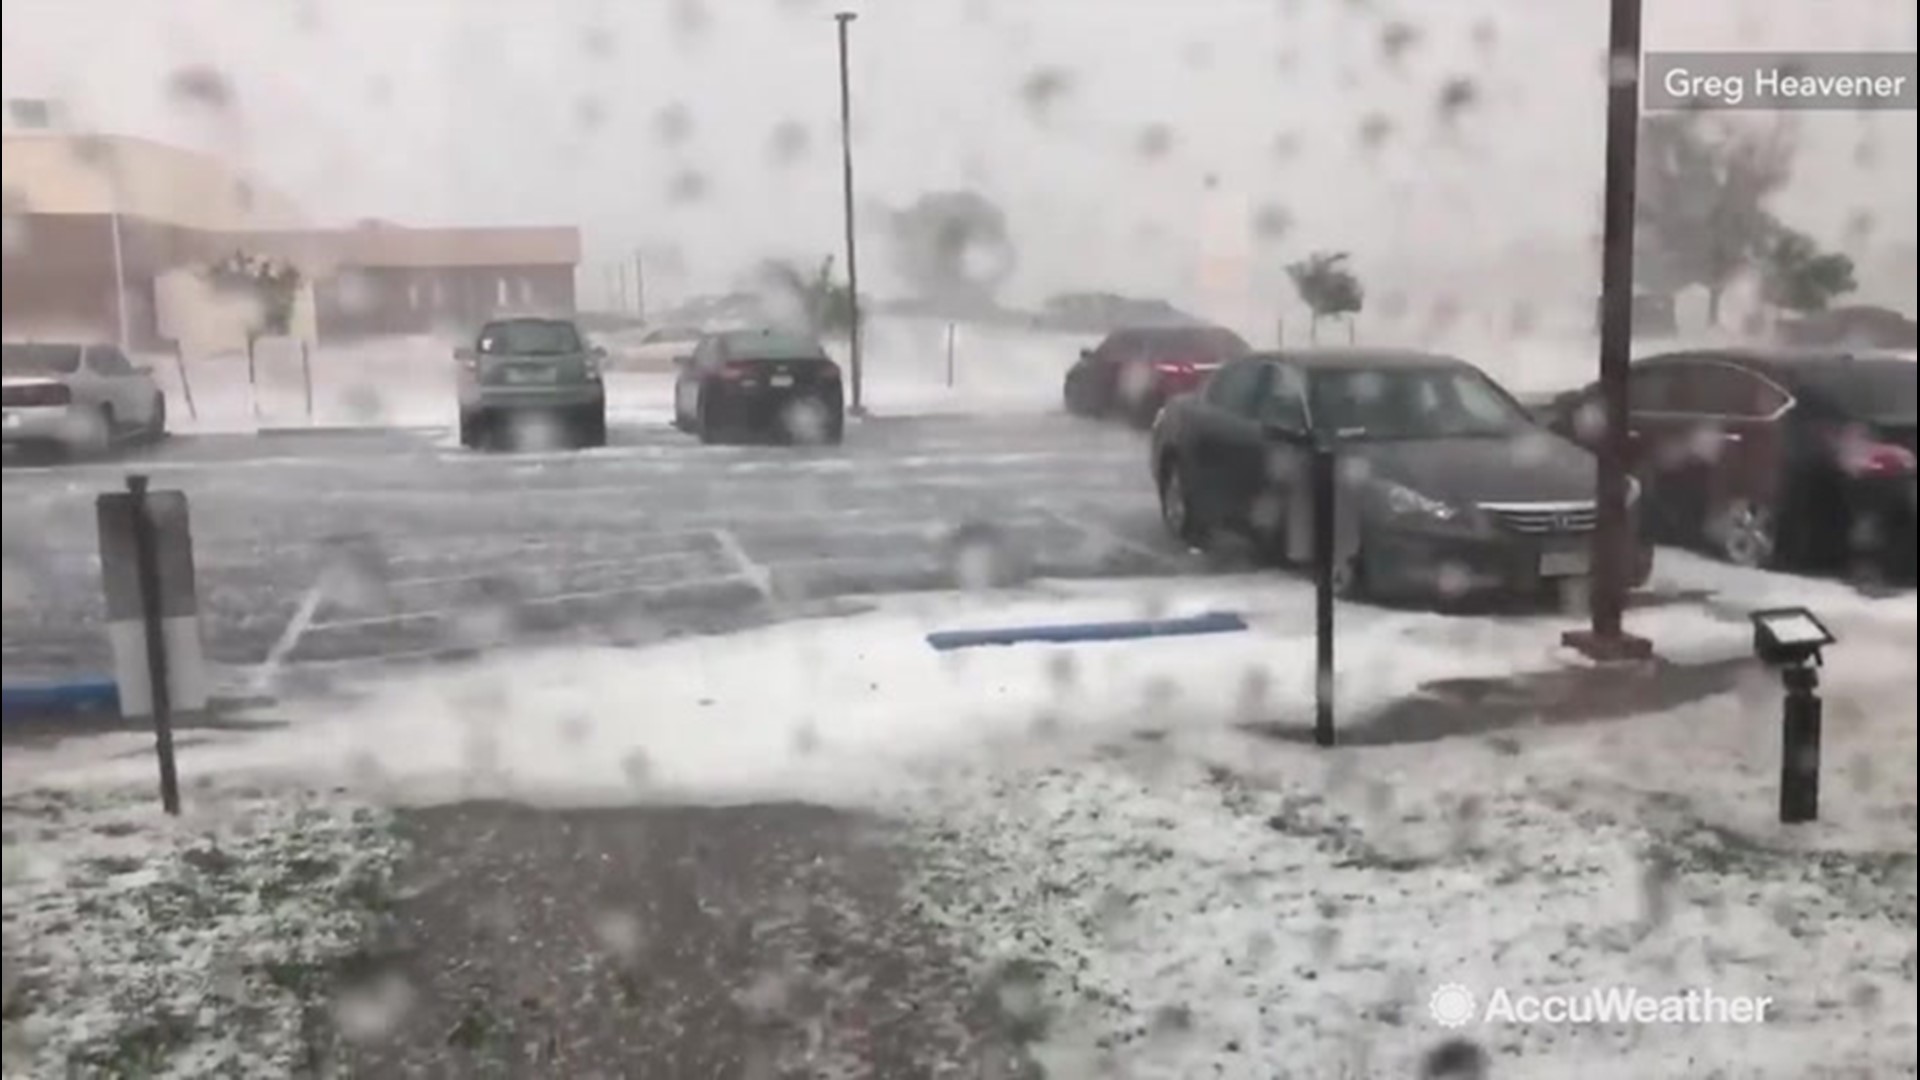 A passing storm dumped small hail in Pueblo, Colorado on June 17, making the parking look like it was just hit by winter storm.